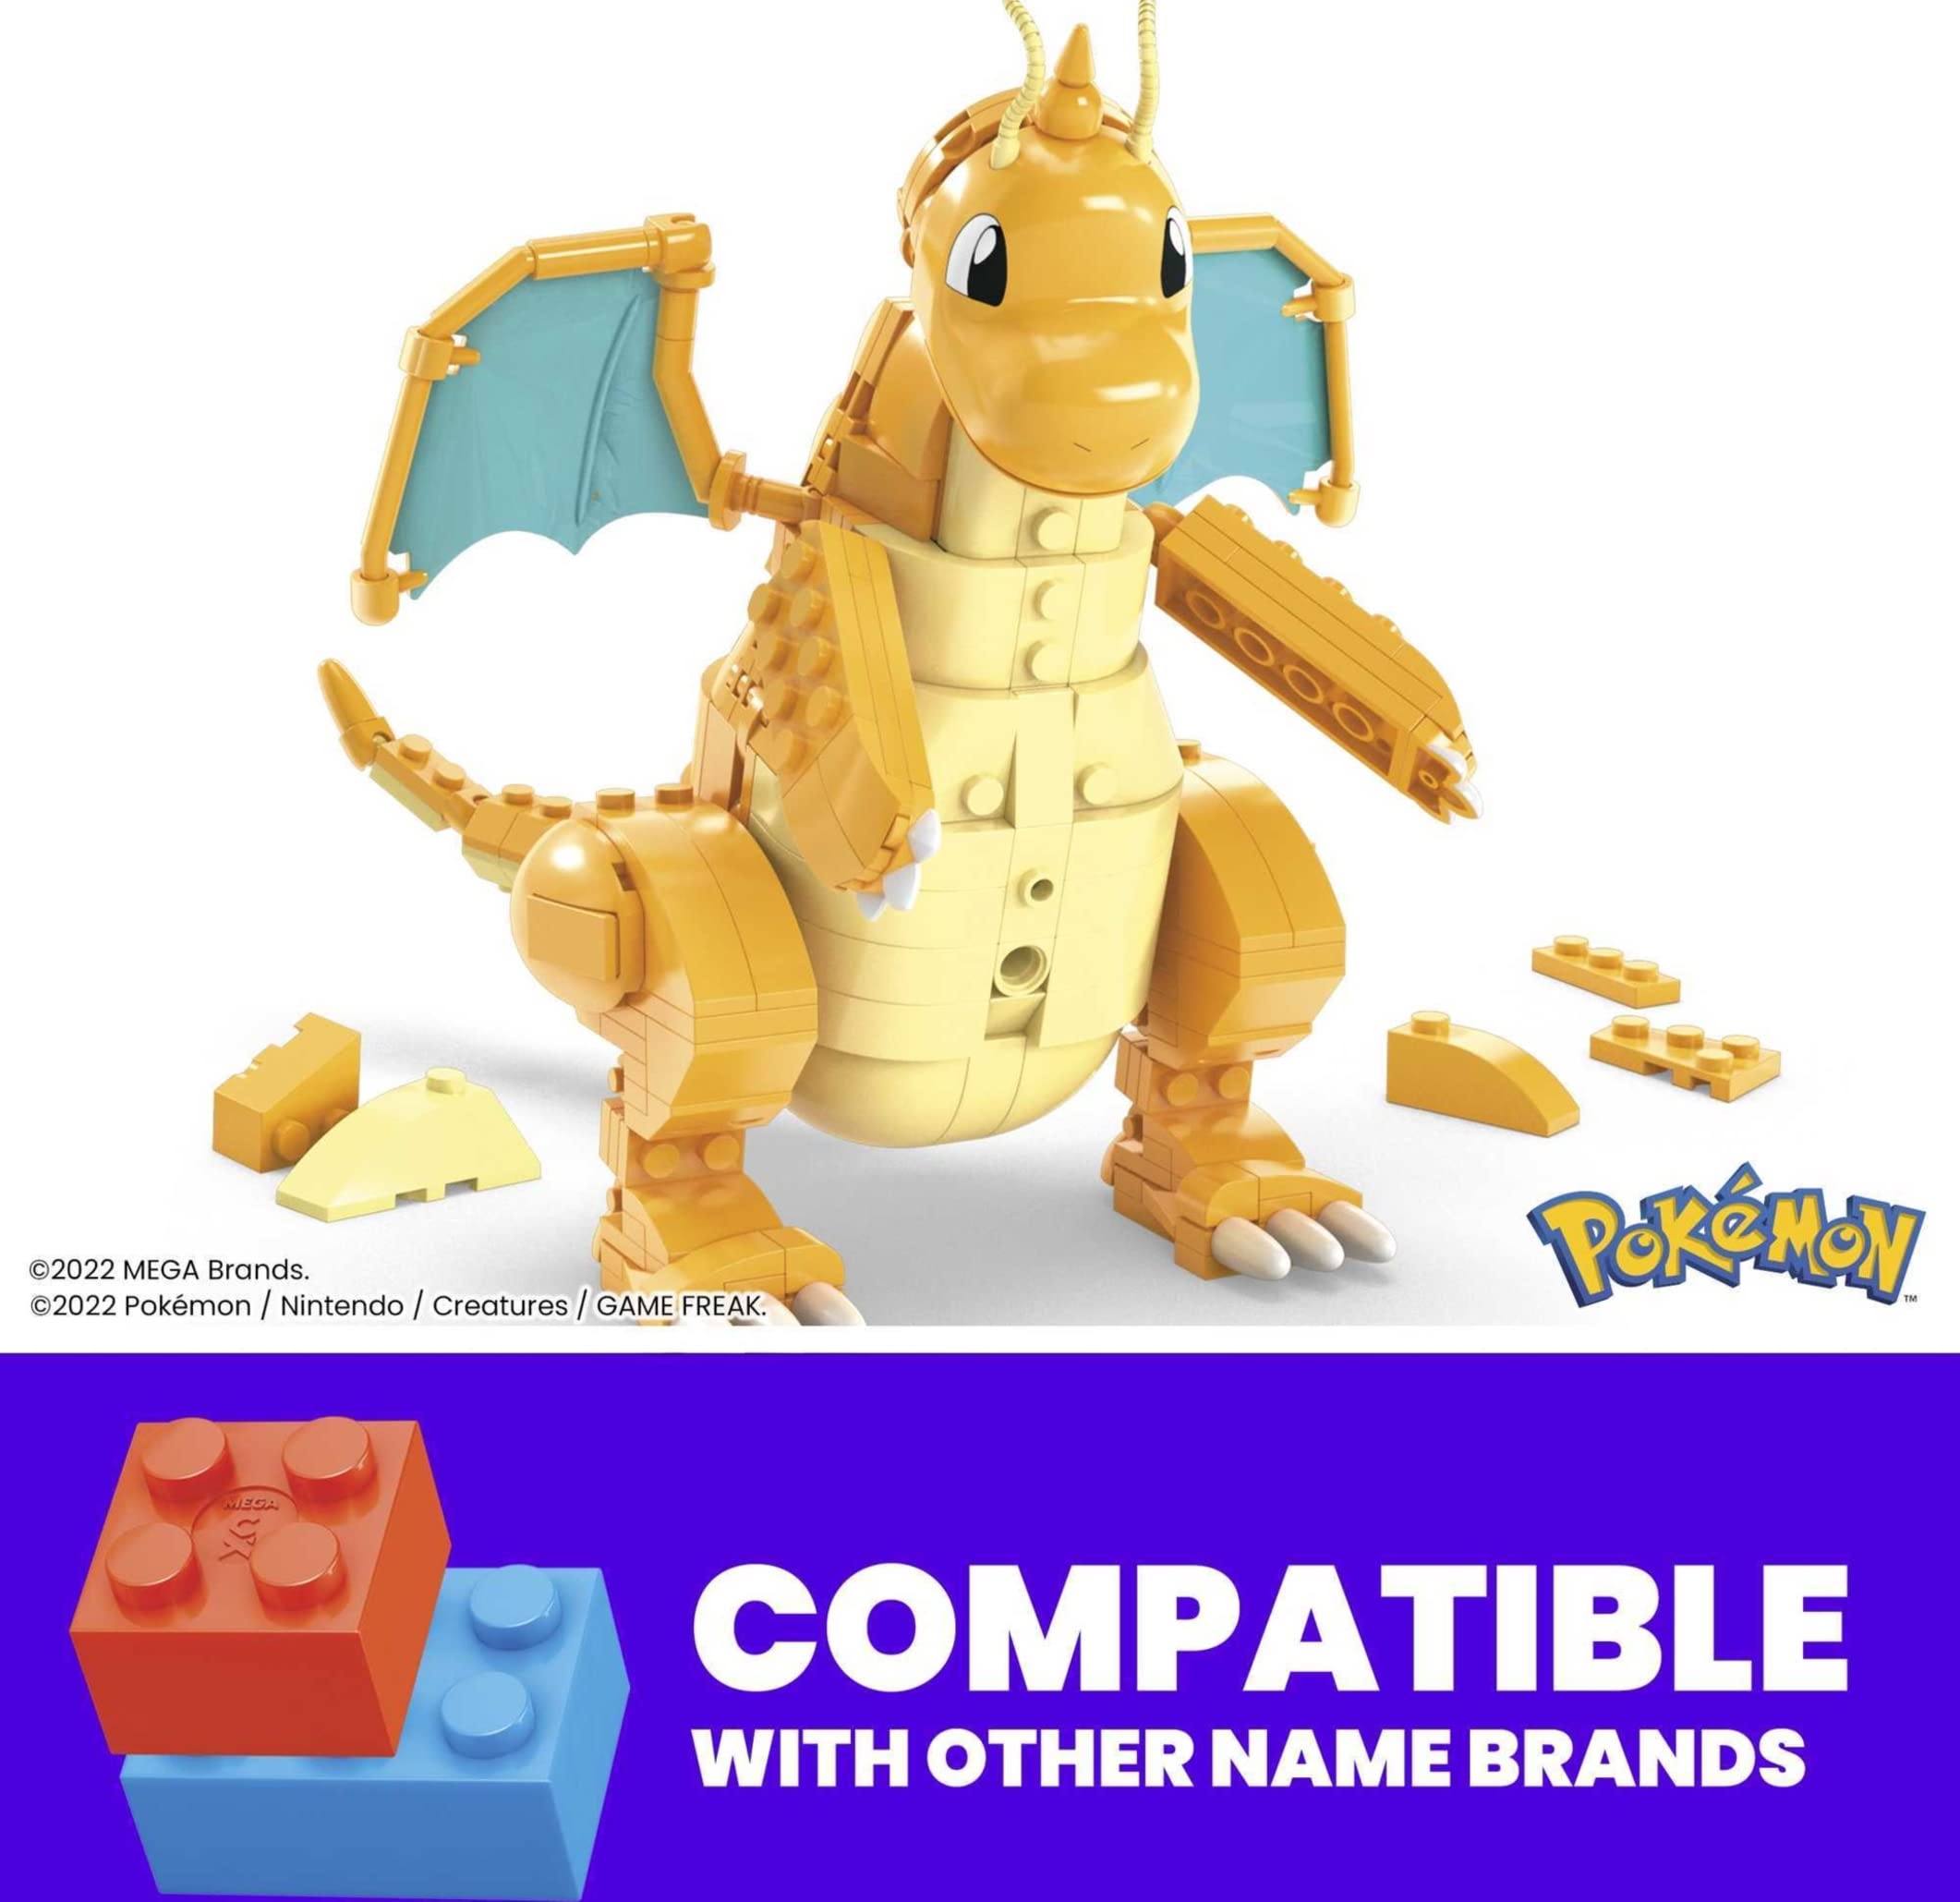 MEGA Pokémon Action Figure Building Toys For Kids, Dragonite With 388 Pieces And Wing Flapping Motion, Age 9+ Years Old Gift Idea